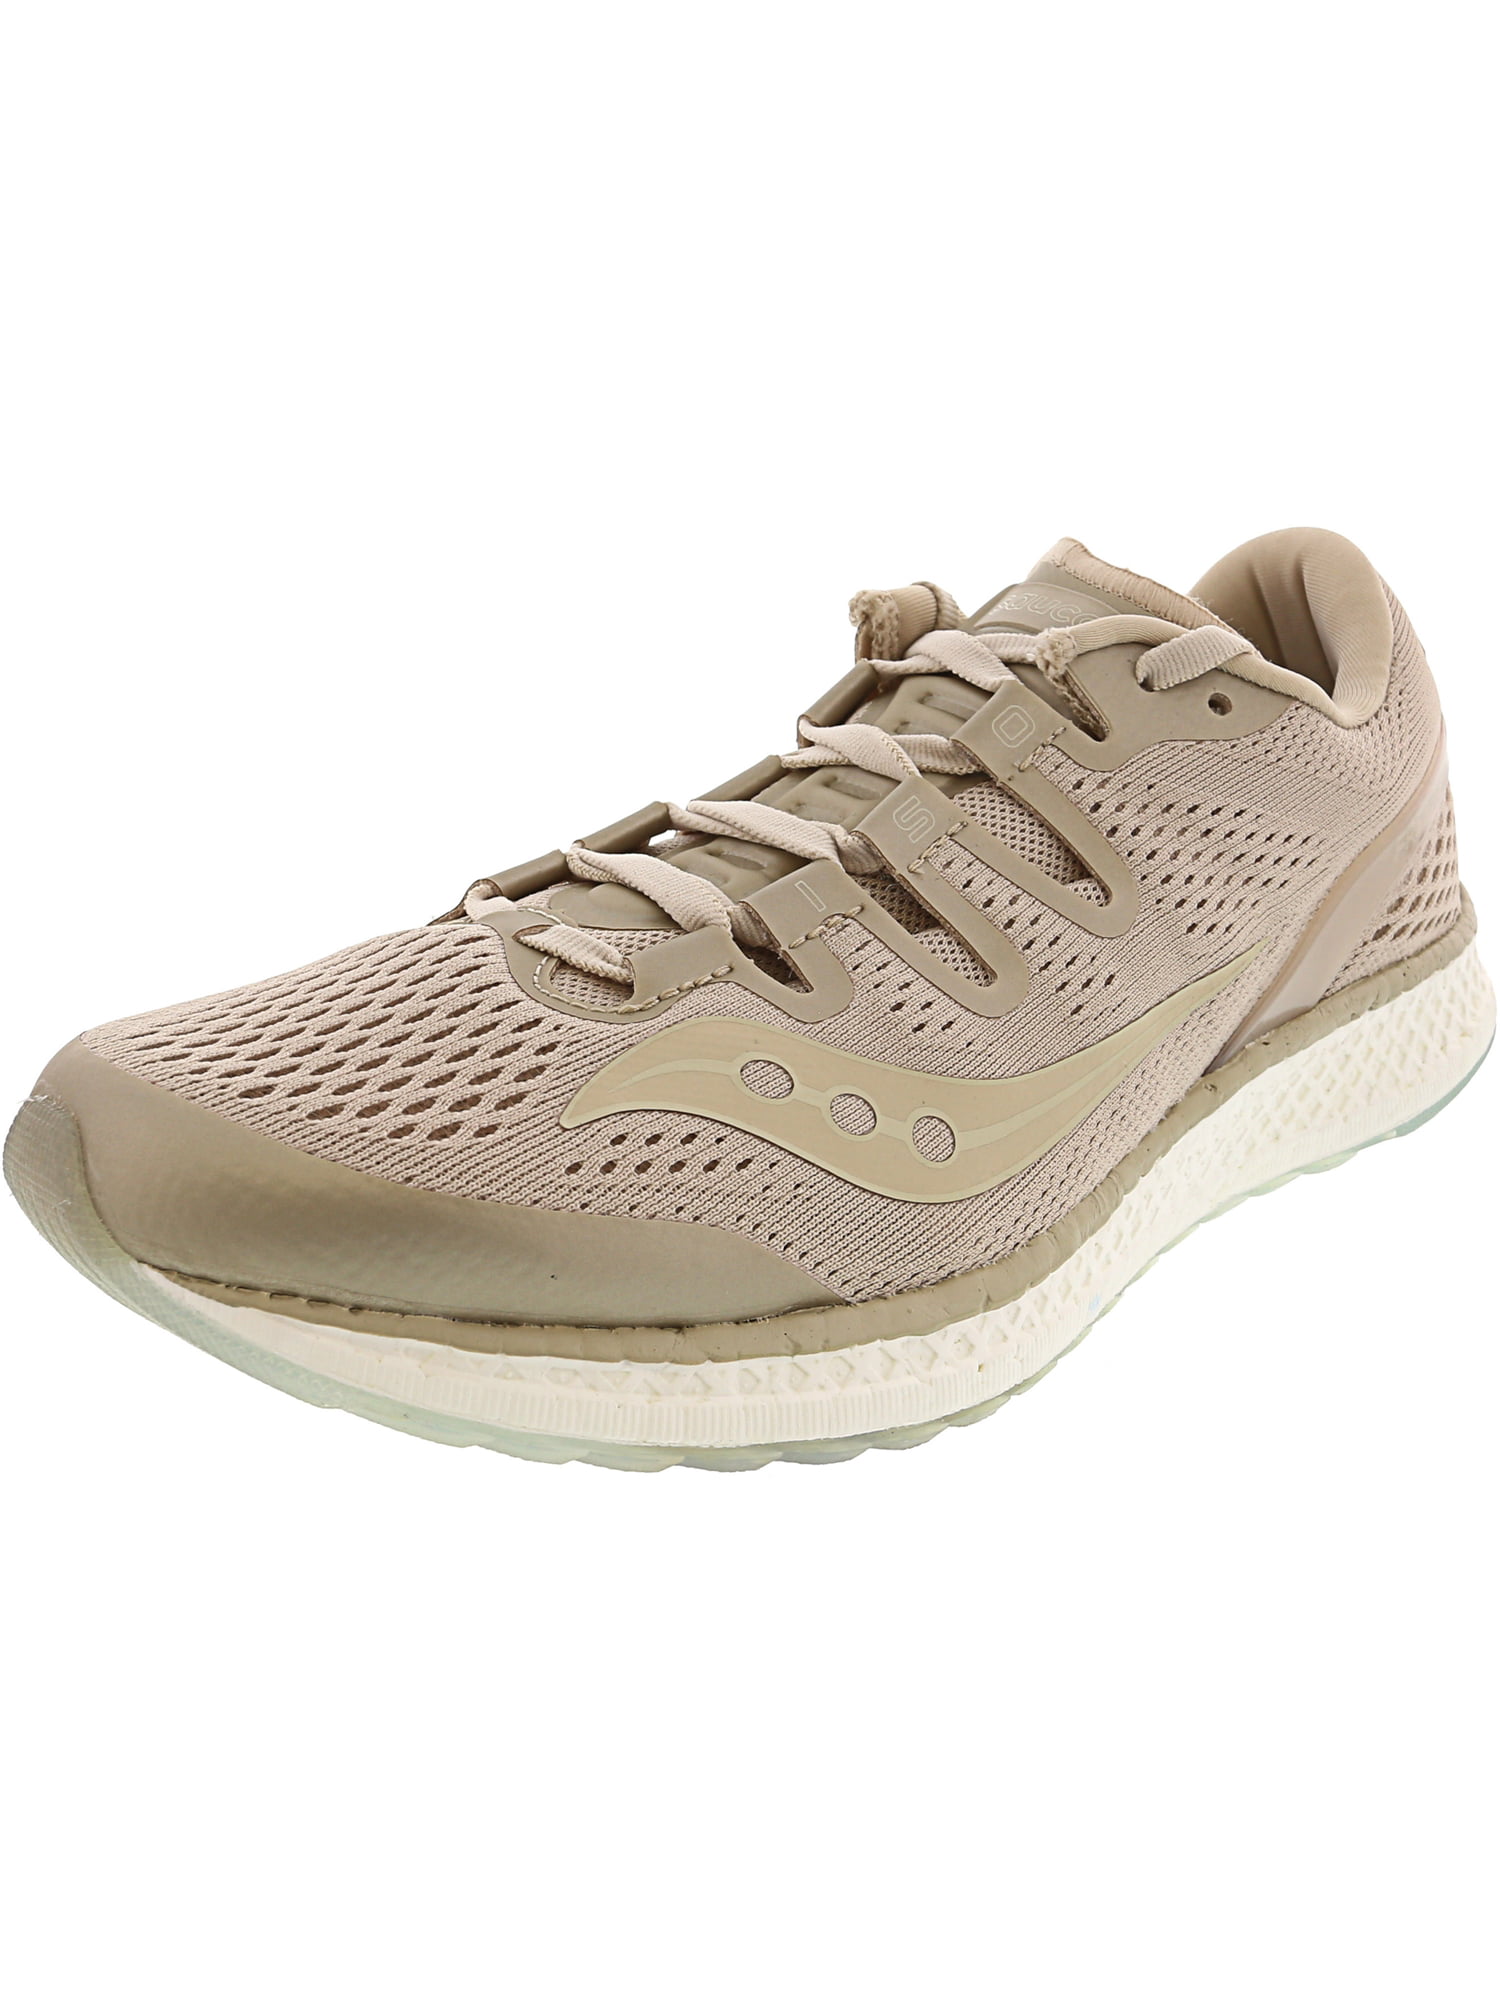 Saucony Men's Freedom ISO Running Shoes S20355-50 Tan PICK YOUR SIZE 